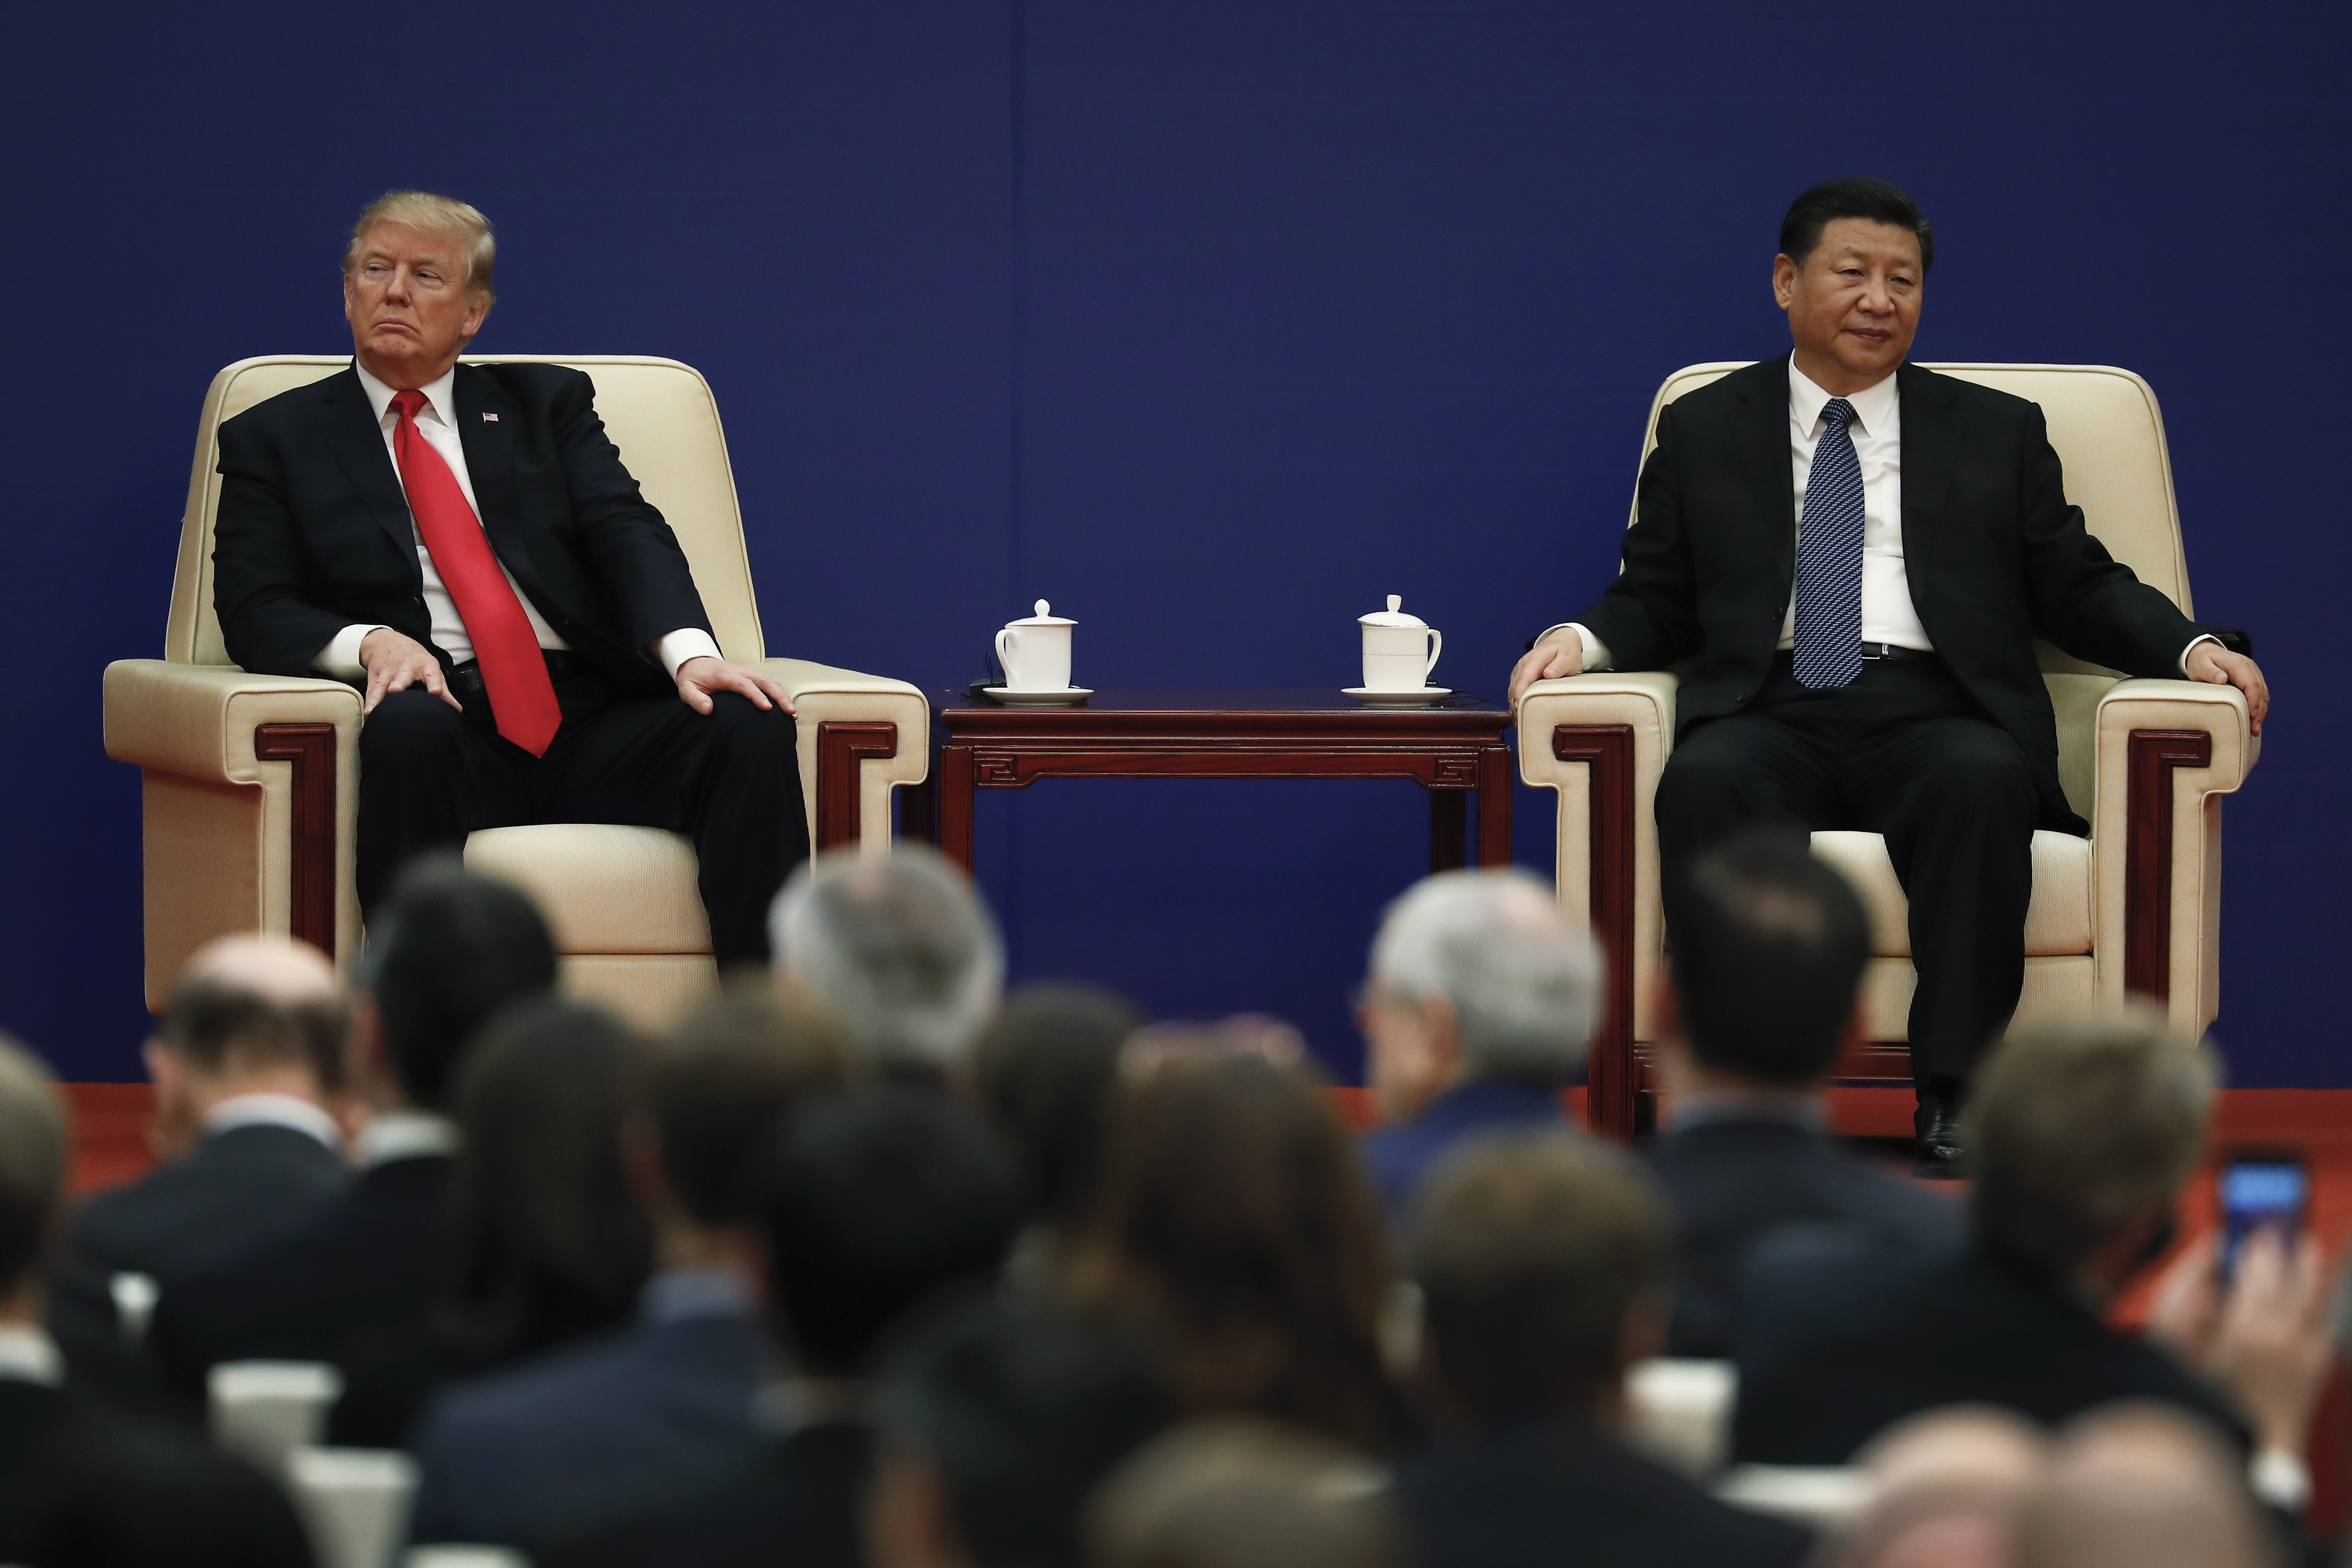 Rivalry and trade spats between the economic giants could deal further blow to globalisation and have broader impact, say experts at SCMP China Conference